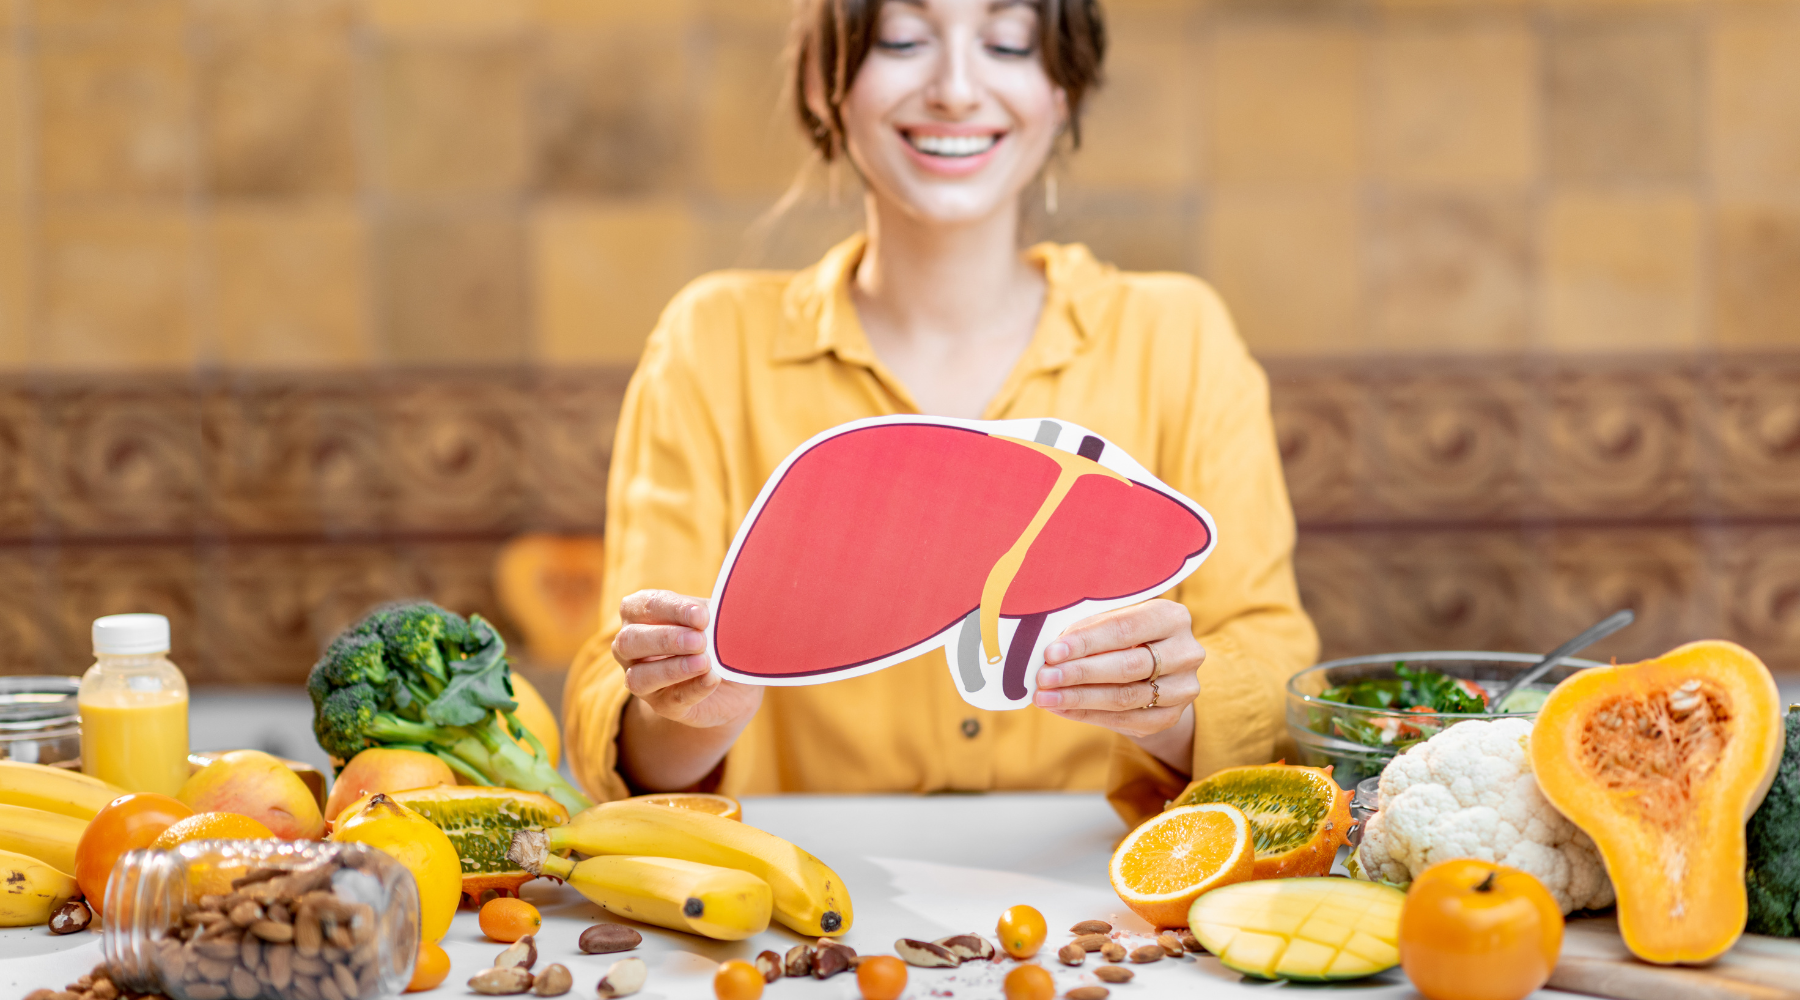 woman holding a liver photo in kitchen